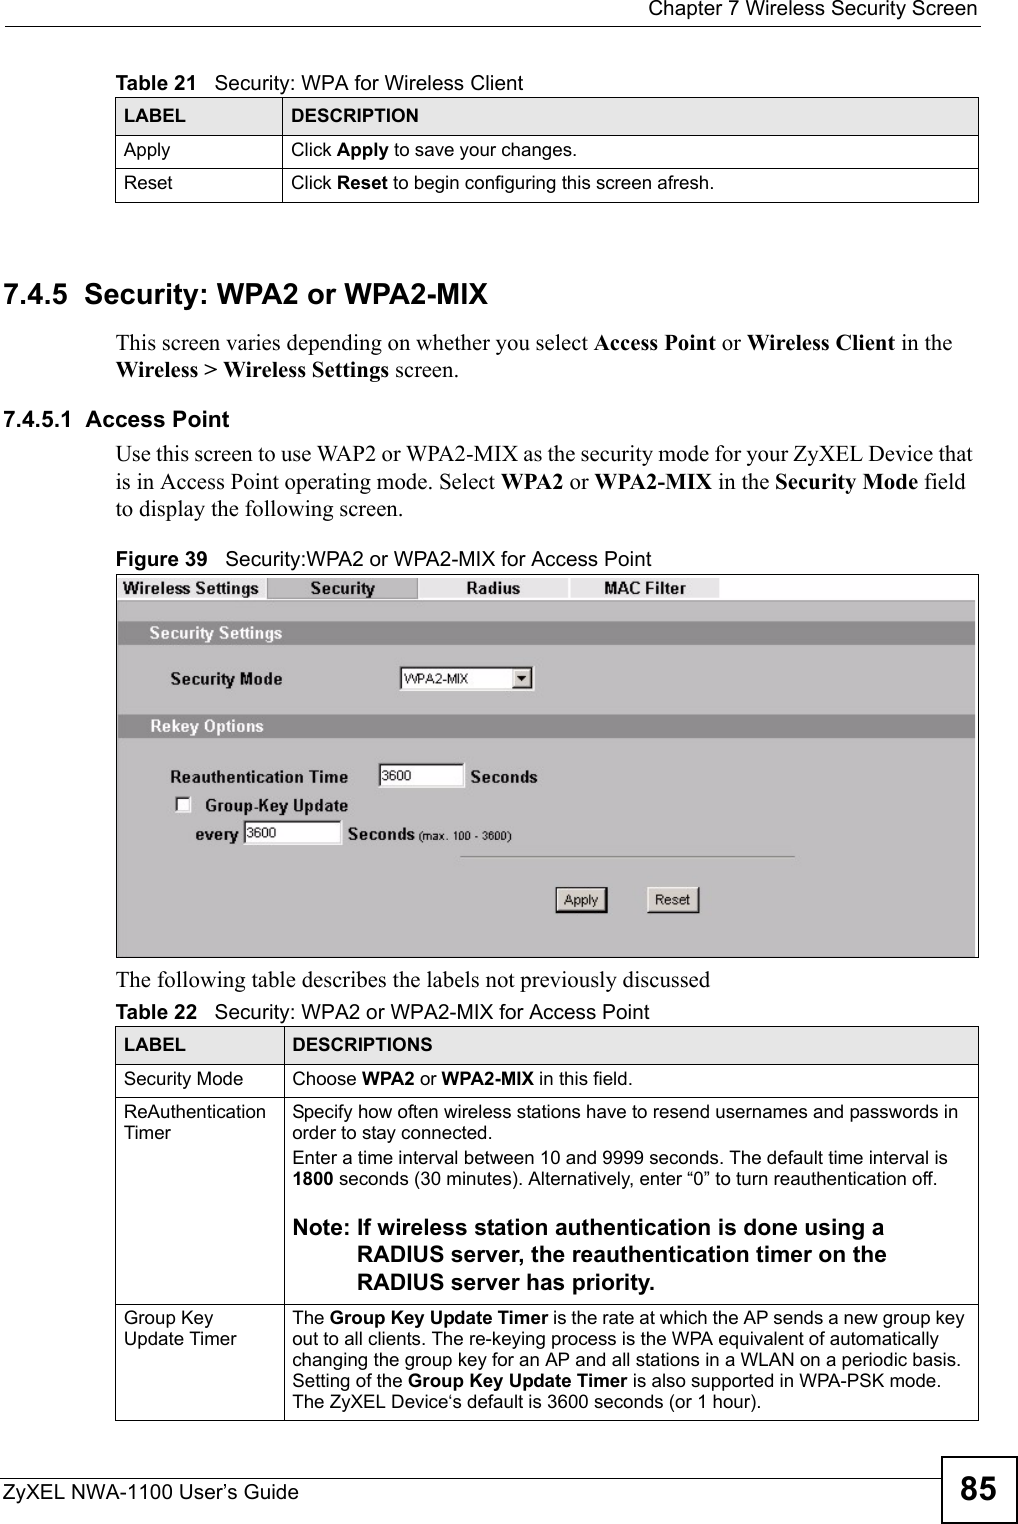  Chapter 7 Wireless Security ScreenZyXEL NWA-1100 User’s Guide 857.4.5  Security: WPA2 or WPA2-MIXThis screen varies depending on whether you select Access Point or Wireless Client in the Wireless &gt; Wireless Settings screen.7.4.5.1  Access PointUse this screen to use WAP2 or WPA2-MIX as the security mode for your ZyXEL Device that is in Access Point operating mode. Select WPA2 or WPA2-MIX in the Security Mode field to display the following screen.Figure 39   Security:WPA2 or WPA2-MIX for Access PointThe following table describes the labels not previously discussedApply Click Apply to save your changes.Reset Click Reset to begin configuring this screen afresh.Table 21   Security: WPA for Wireless ClientLABEL DESCRIPTIONTable 22   Security: WPA2 or WPA2-MIX for Access PointLABEL DESCRIPTIONSSecurity Mode Choose WPA2 or WPA2-MIX in this field.ReAuthentication TimerSpecify how often wireless stations have to resend usernames and passwords in order to stay connected.  Enter a time interval between 10 and 9999 seconds. The default time interval is 1800 seconds (30 minutes). Alternatively, enter “0” to turn reauthentication off. Note: If wireless station authentication is done using a RADIUS server, the reauthentication timer on the RADIUS server has priority. Group Key Update TimerThe Group Key Update Timer is the rate at which the AP sends a new group key out to all clients. The re-keying process is the WPA equivalent of automatically changing the group key for an AP and all stations in a WLAN on a periodic basis. Setting of the Group Key Update Timer is also supported in WPA-PSK mode. The ZyXEL Device‘s default is 3600 seconds (or 1 hour). 